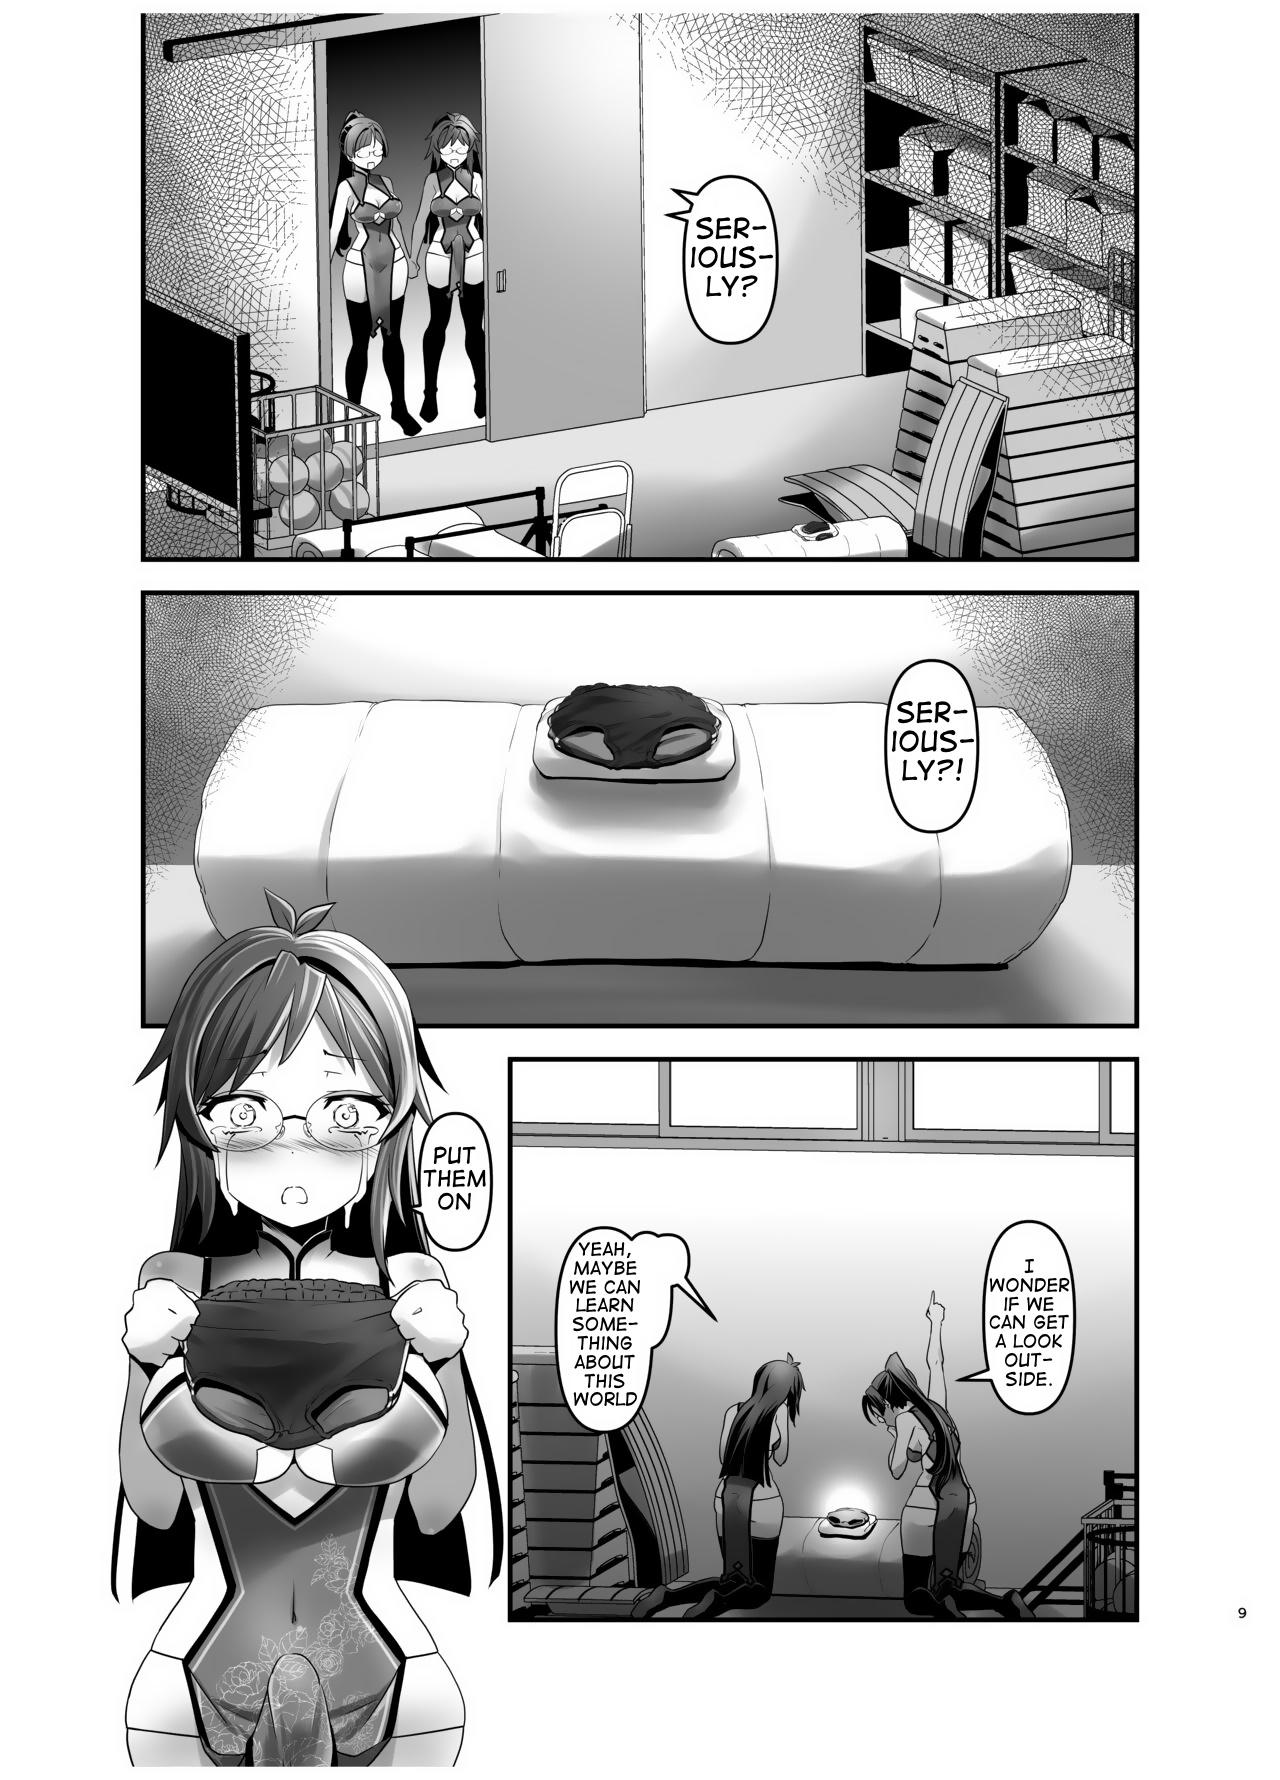 Groupsex Ore ga Bunretsu shite Isekai de TS suru Hanashi 4 | The Story of How I Split Up and TS In a Different World Ch 4 Tribute - Page 8